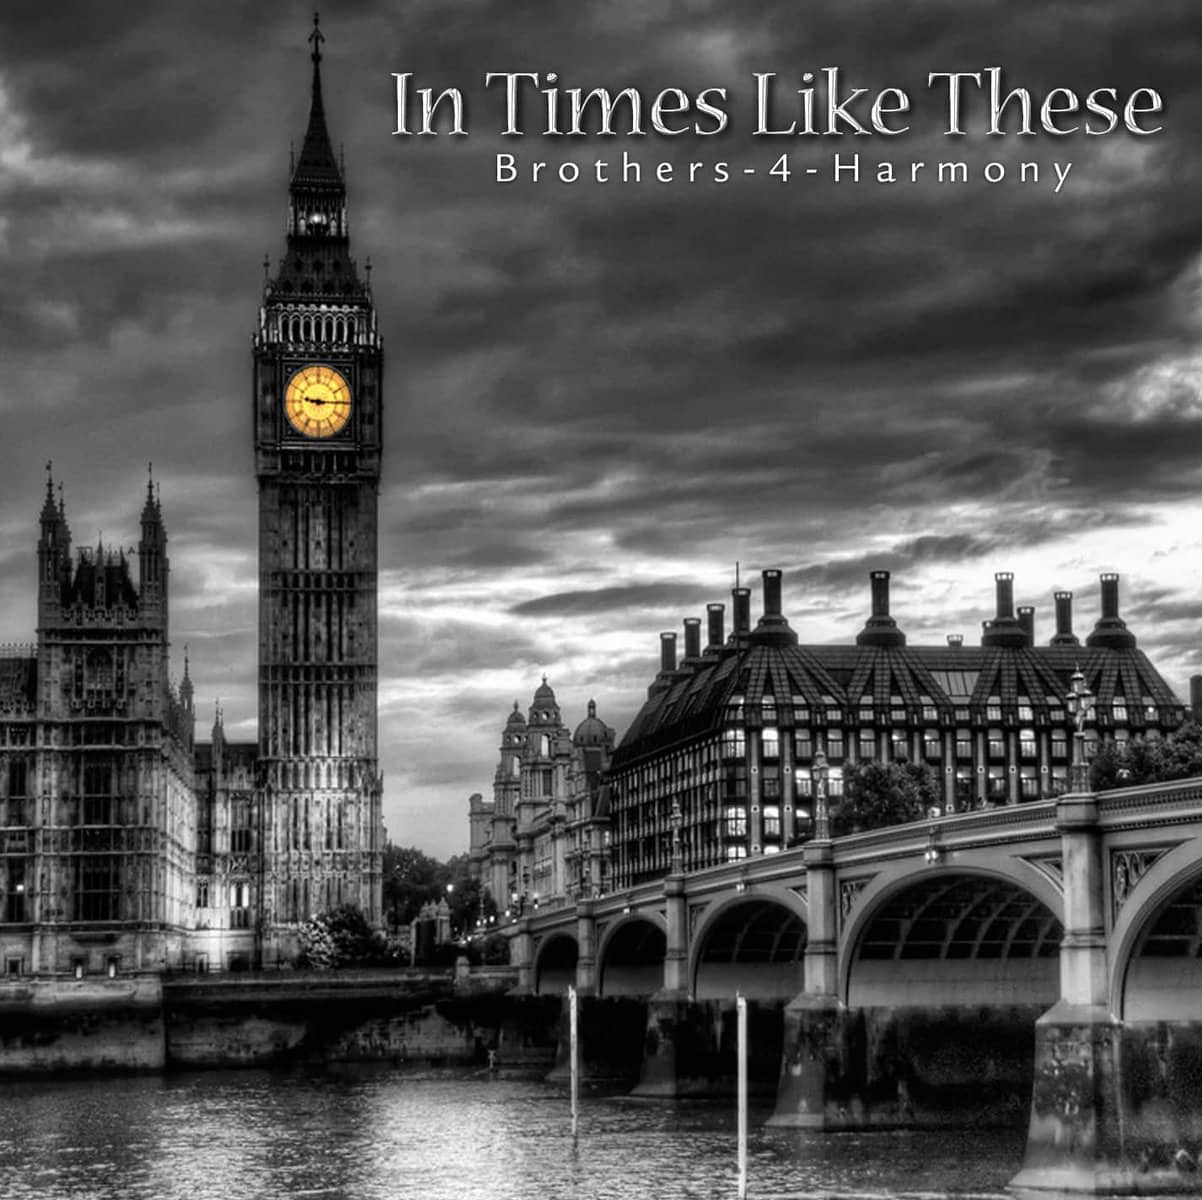 Cover image "In times Like These" by Brothers-4-Harmony